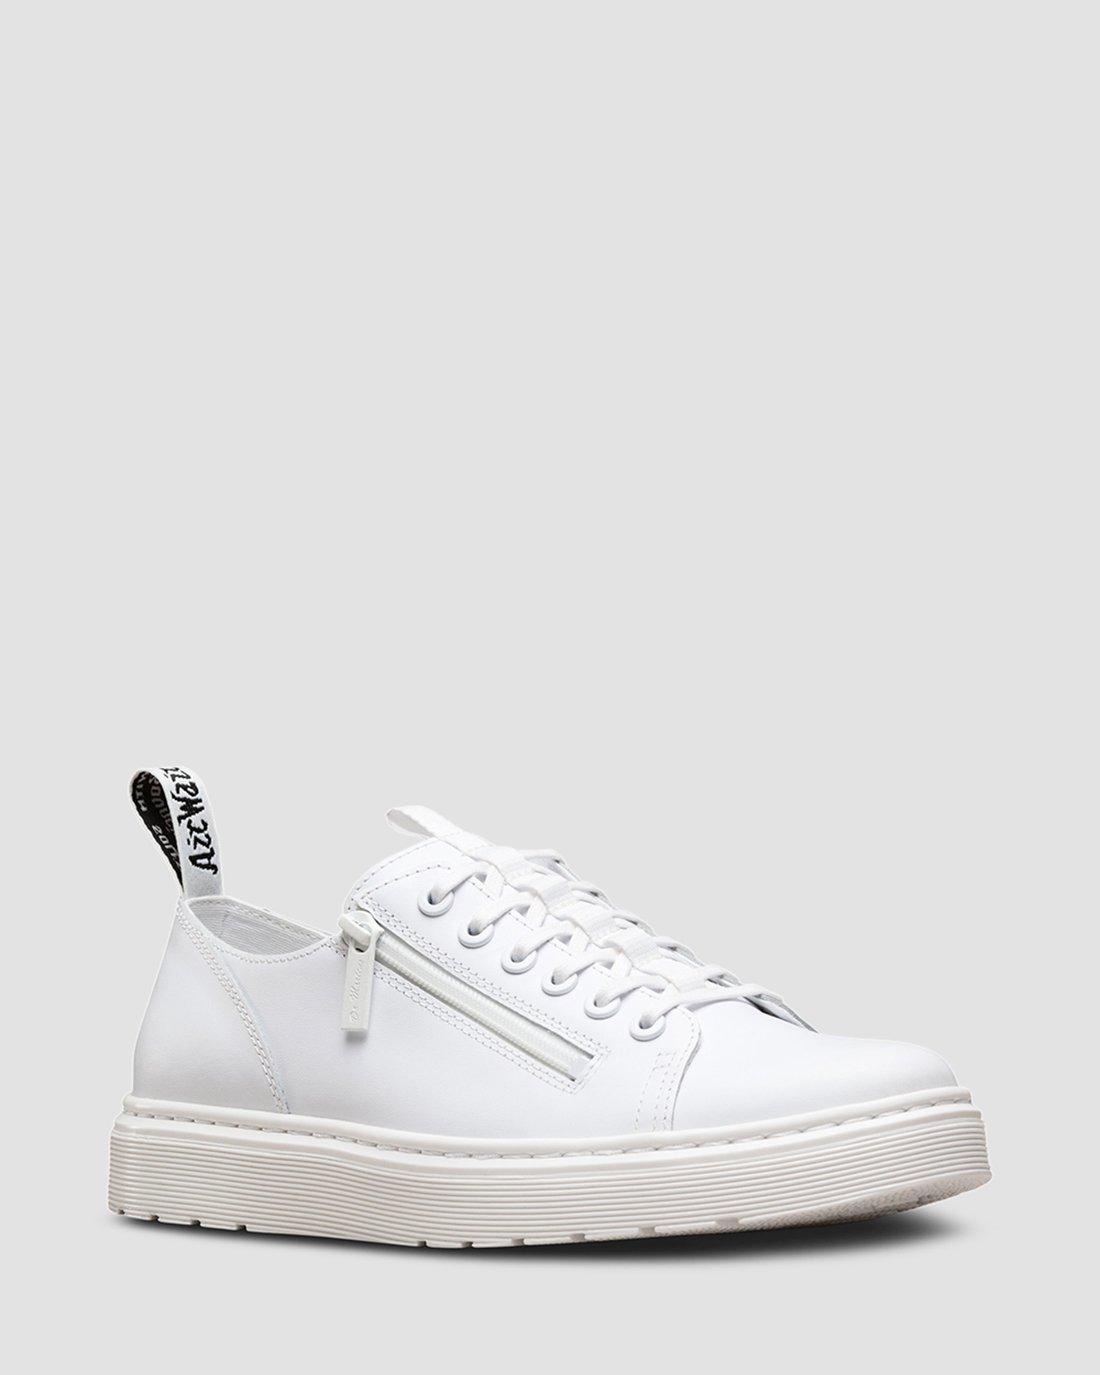 Dr. Martens Dante Leather Sneakers in White for Men